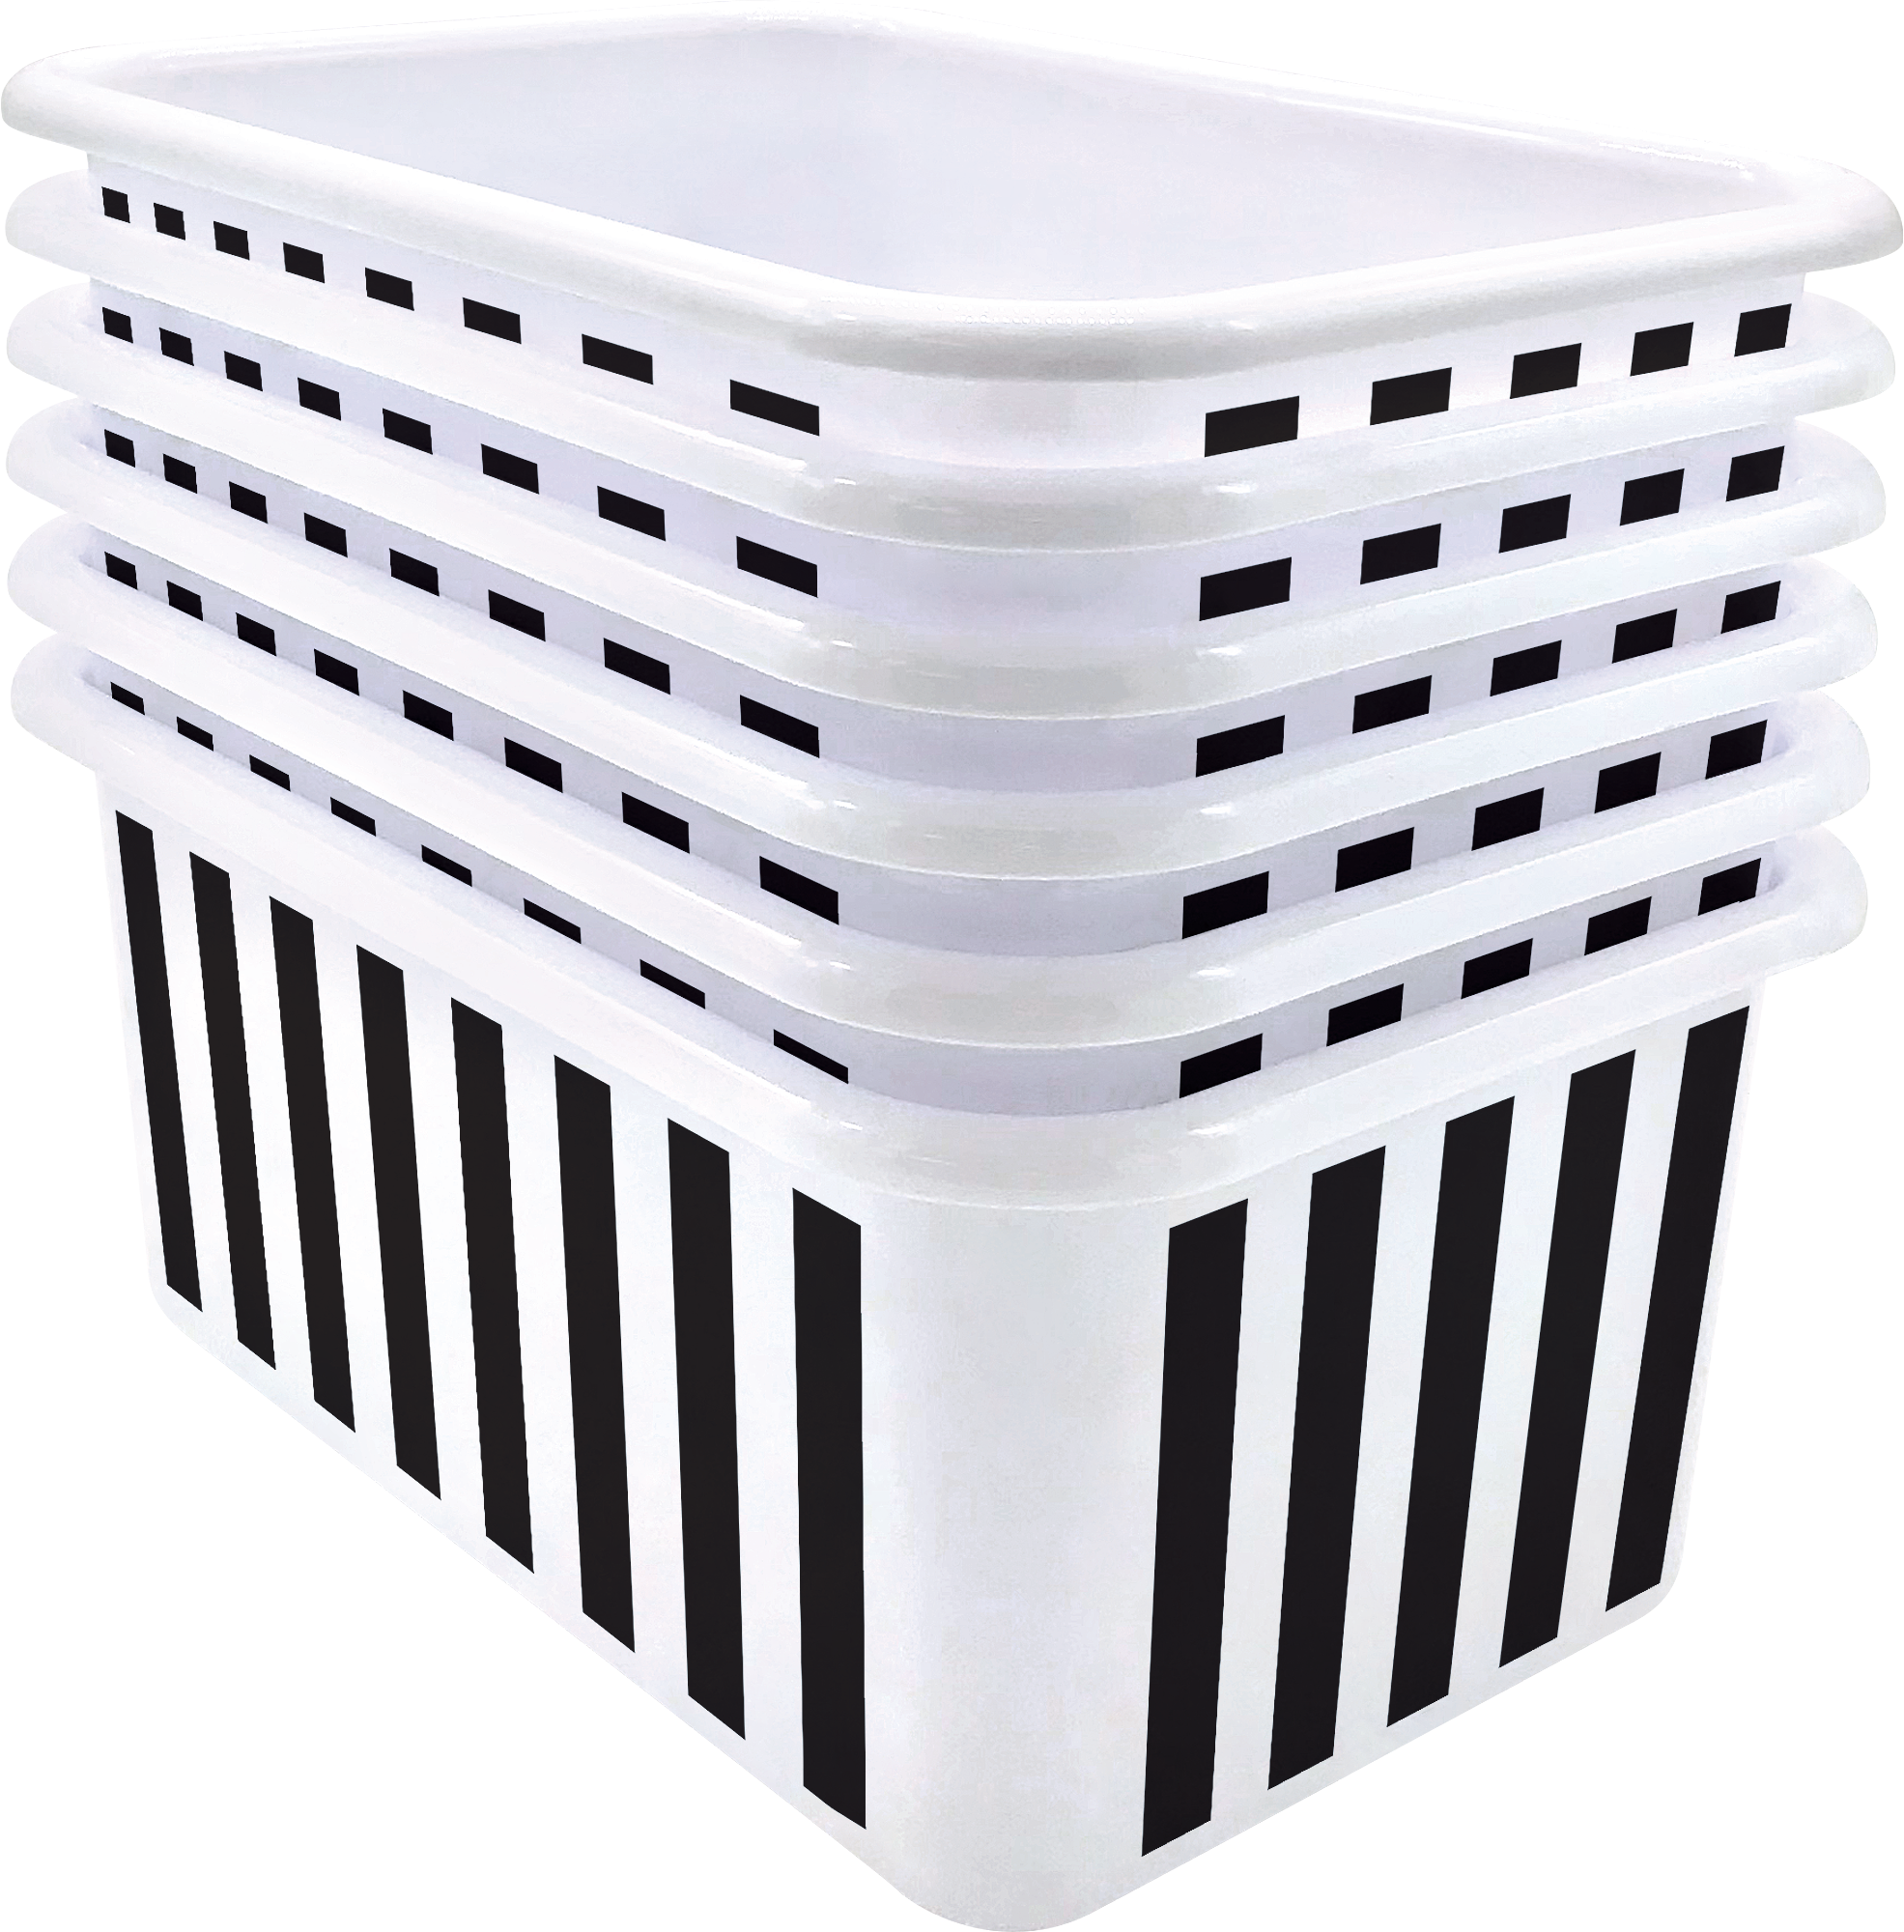 Black and White Design Small Plastic Storage Bins Set of 6 - by TCR